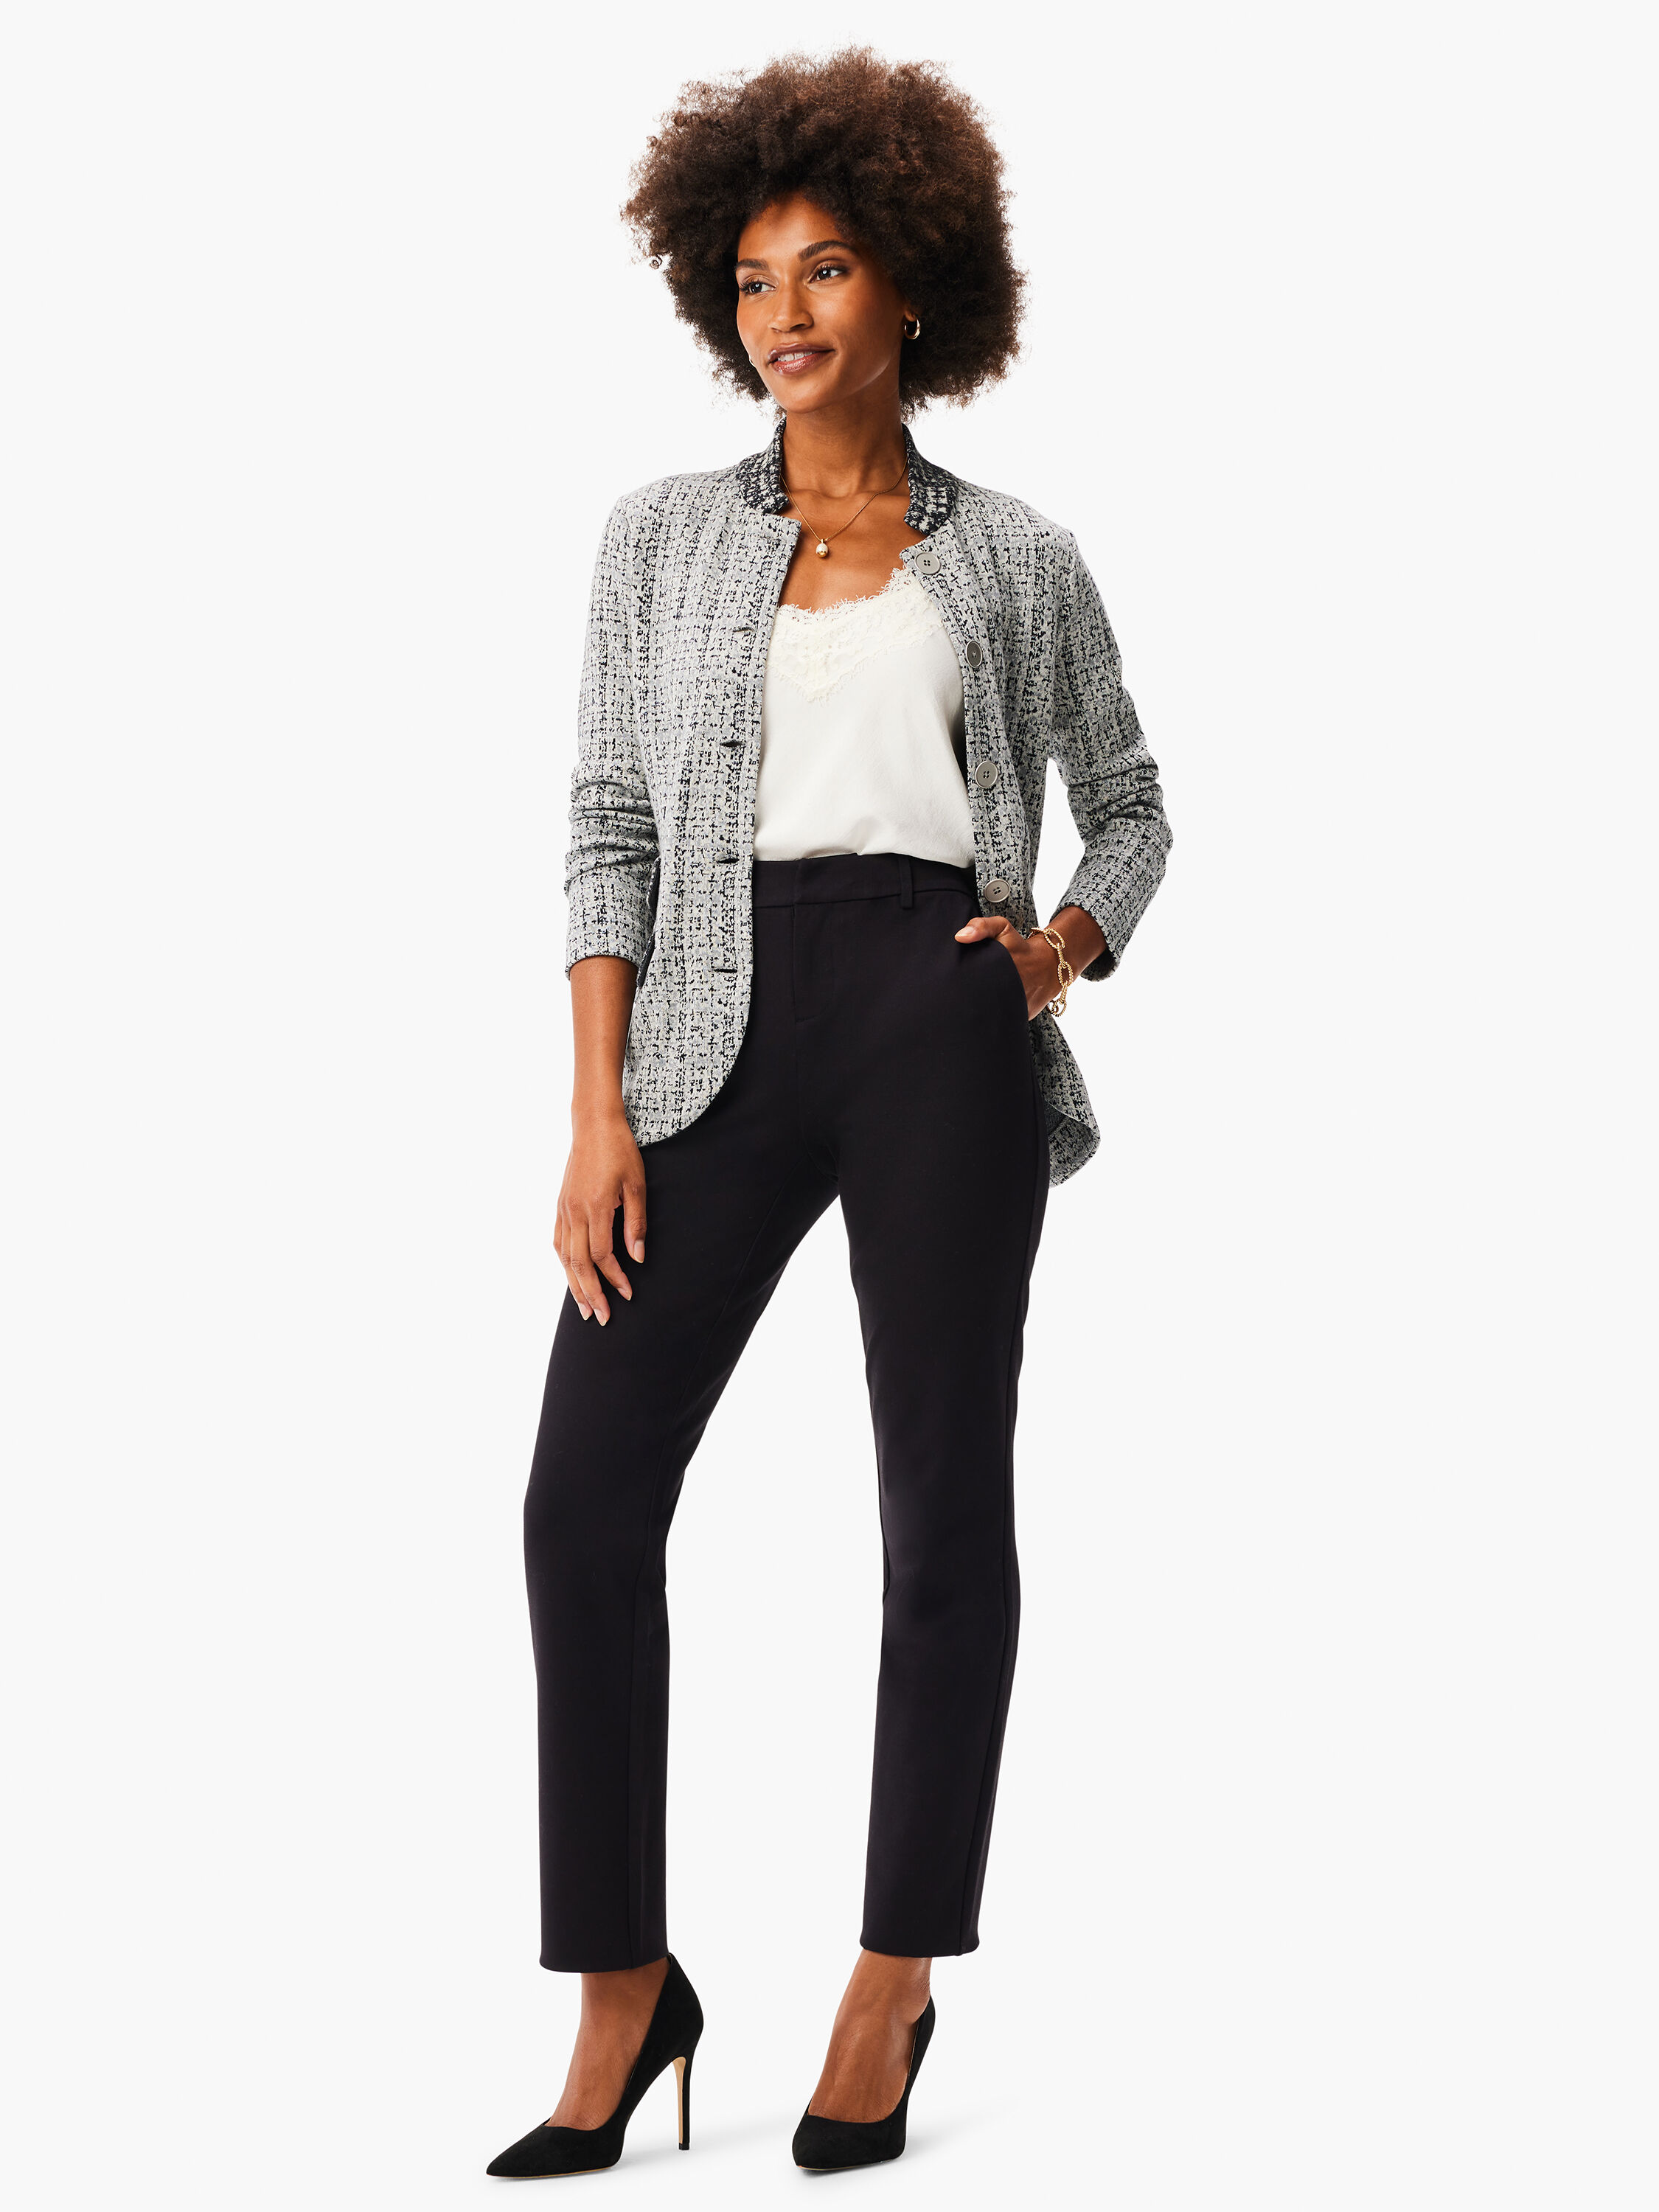 Work, Dressy + Casual Pants for Women | Stretch Pants | NIC+ZOE